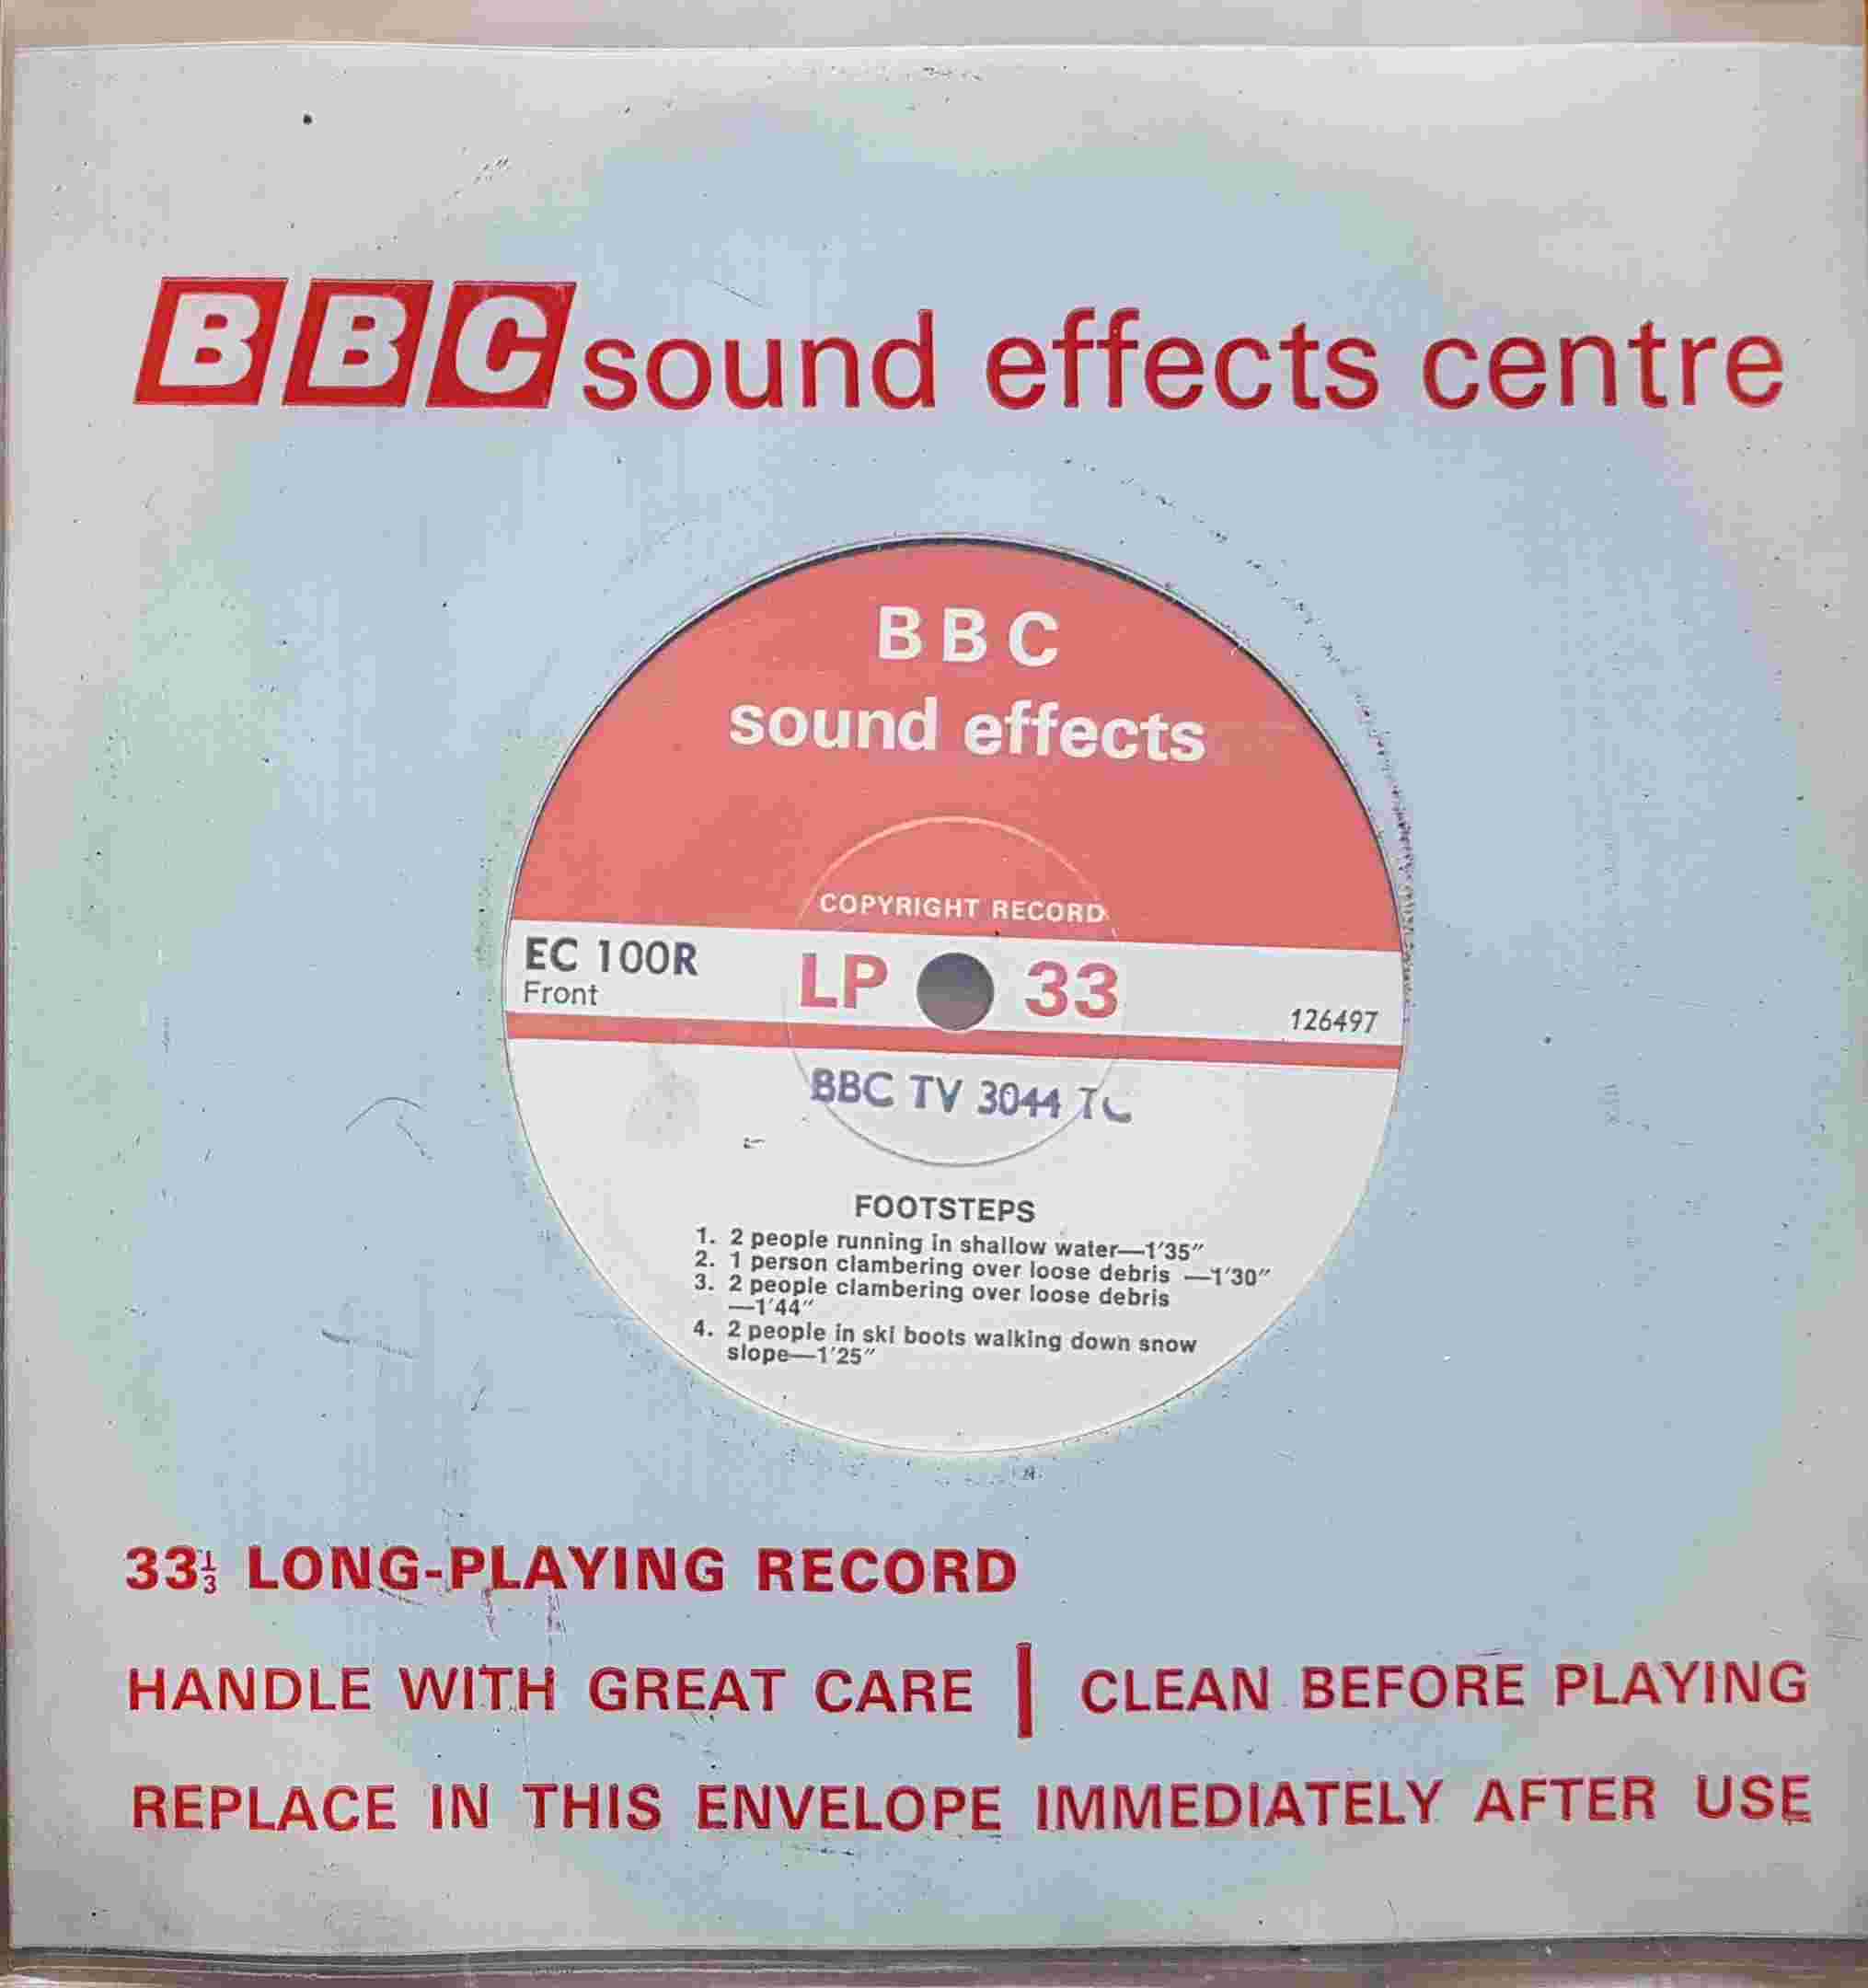 Picture of EC 100R Footsteps by artist Not registered from the BBC records and Tapes library